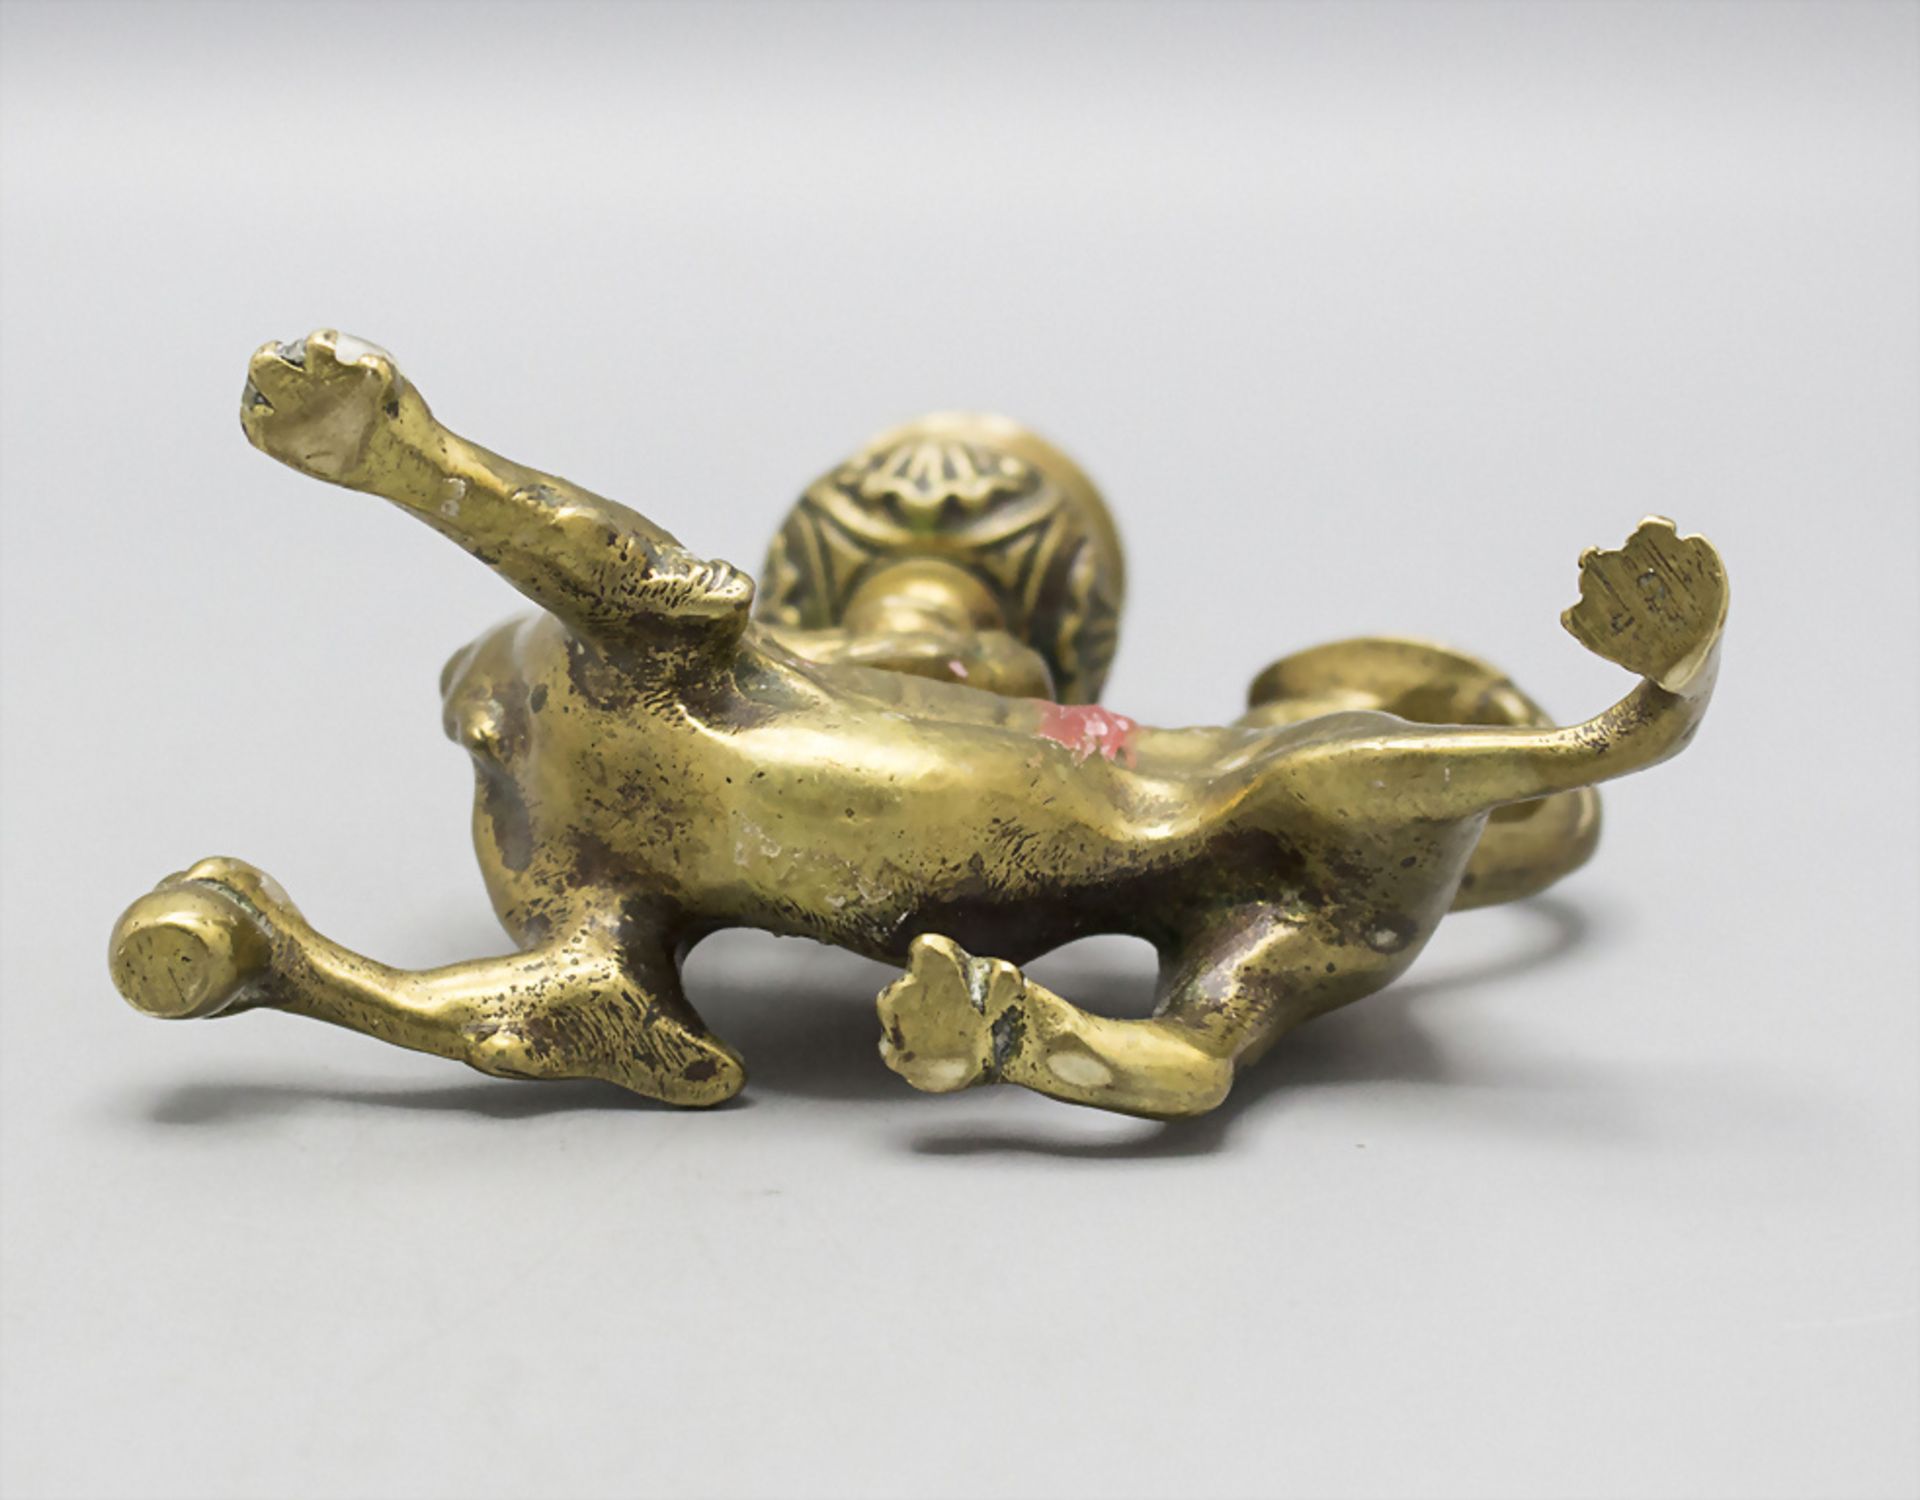 Bronzeleuchter 'Drache' / A bronze candle holder with a dragon, Frankreich, 19. Jh. - Image 5 of 5